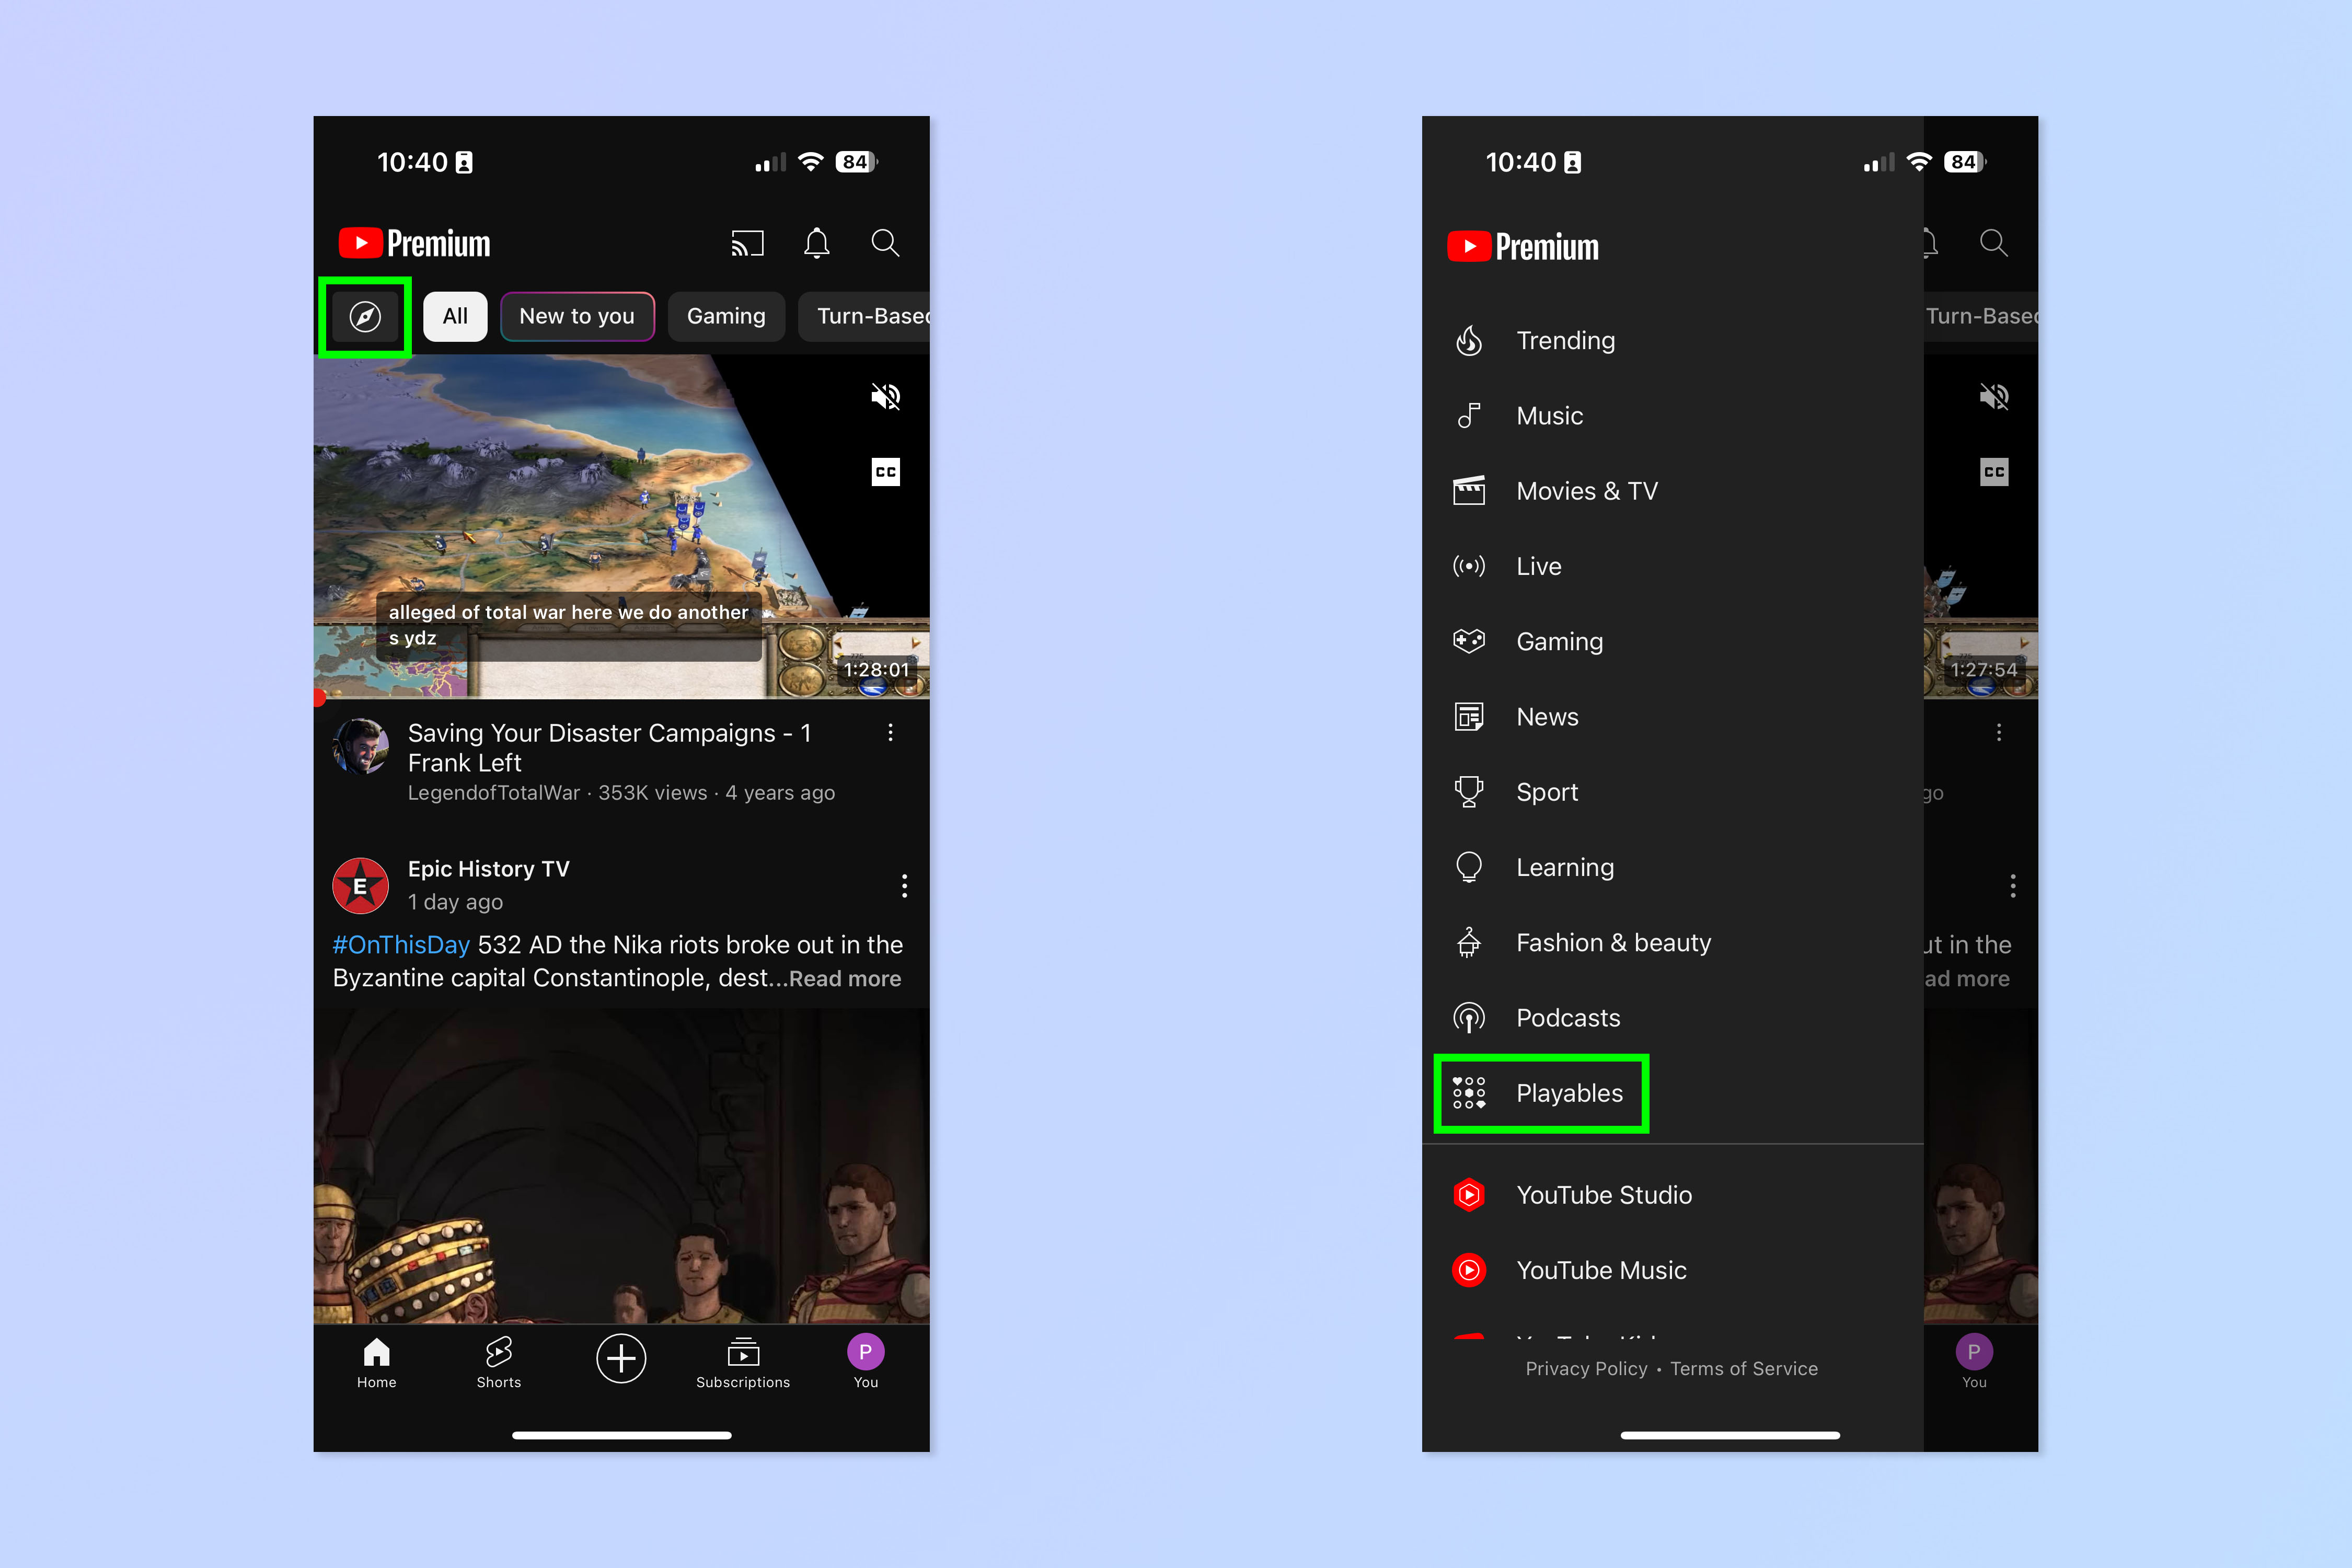 A screenshot showing how to play games on YouTube mobile app